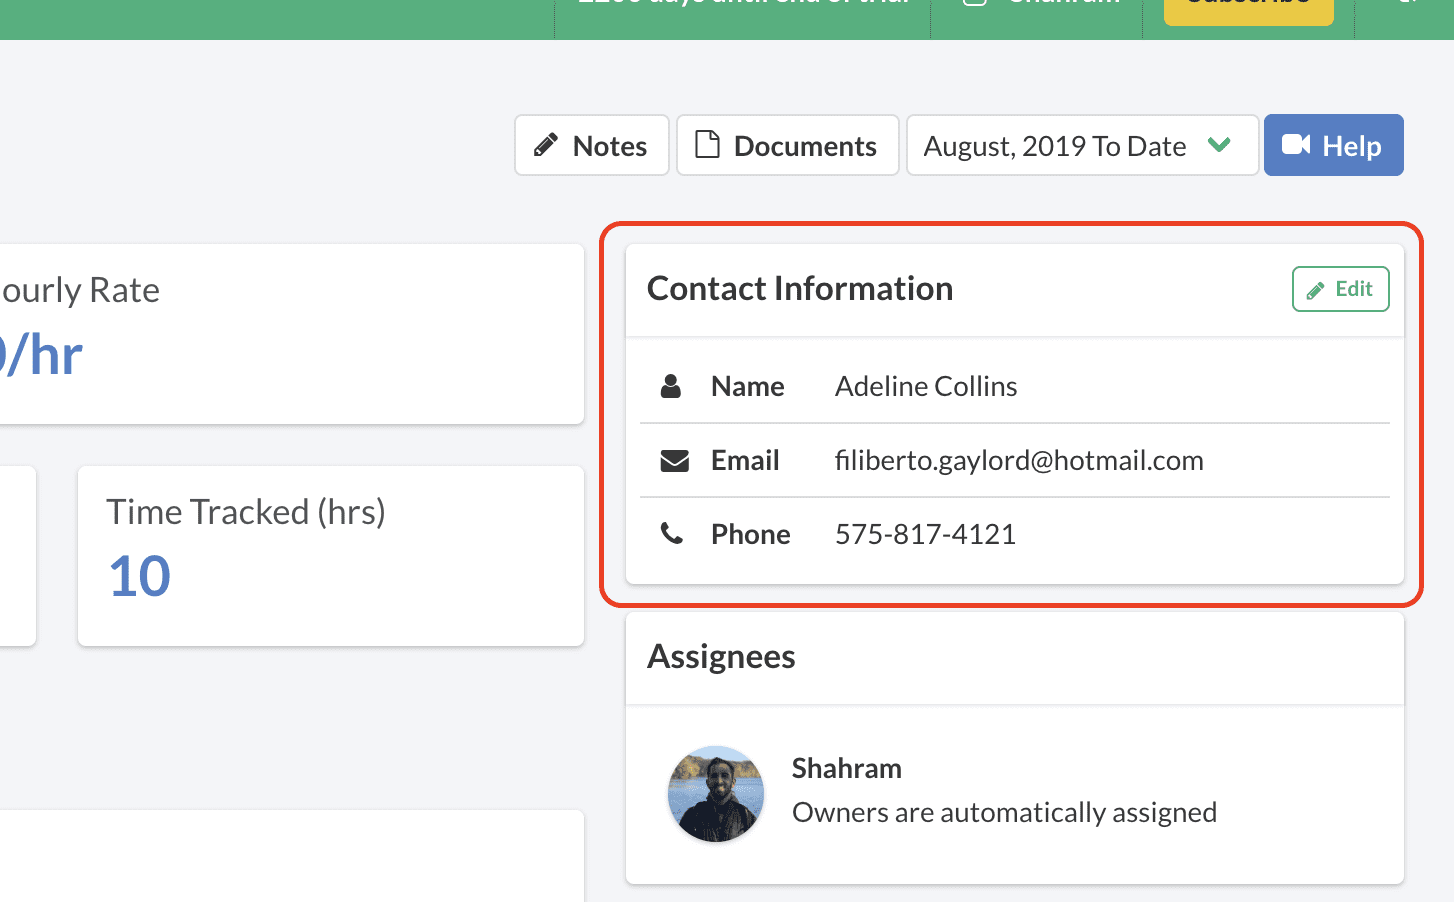 Updates To The Client CRM